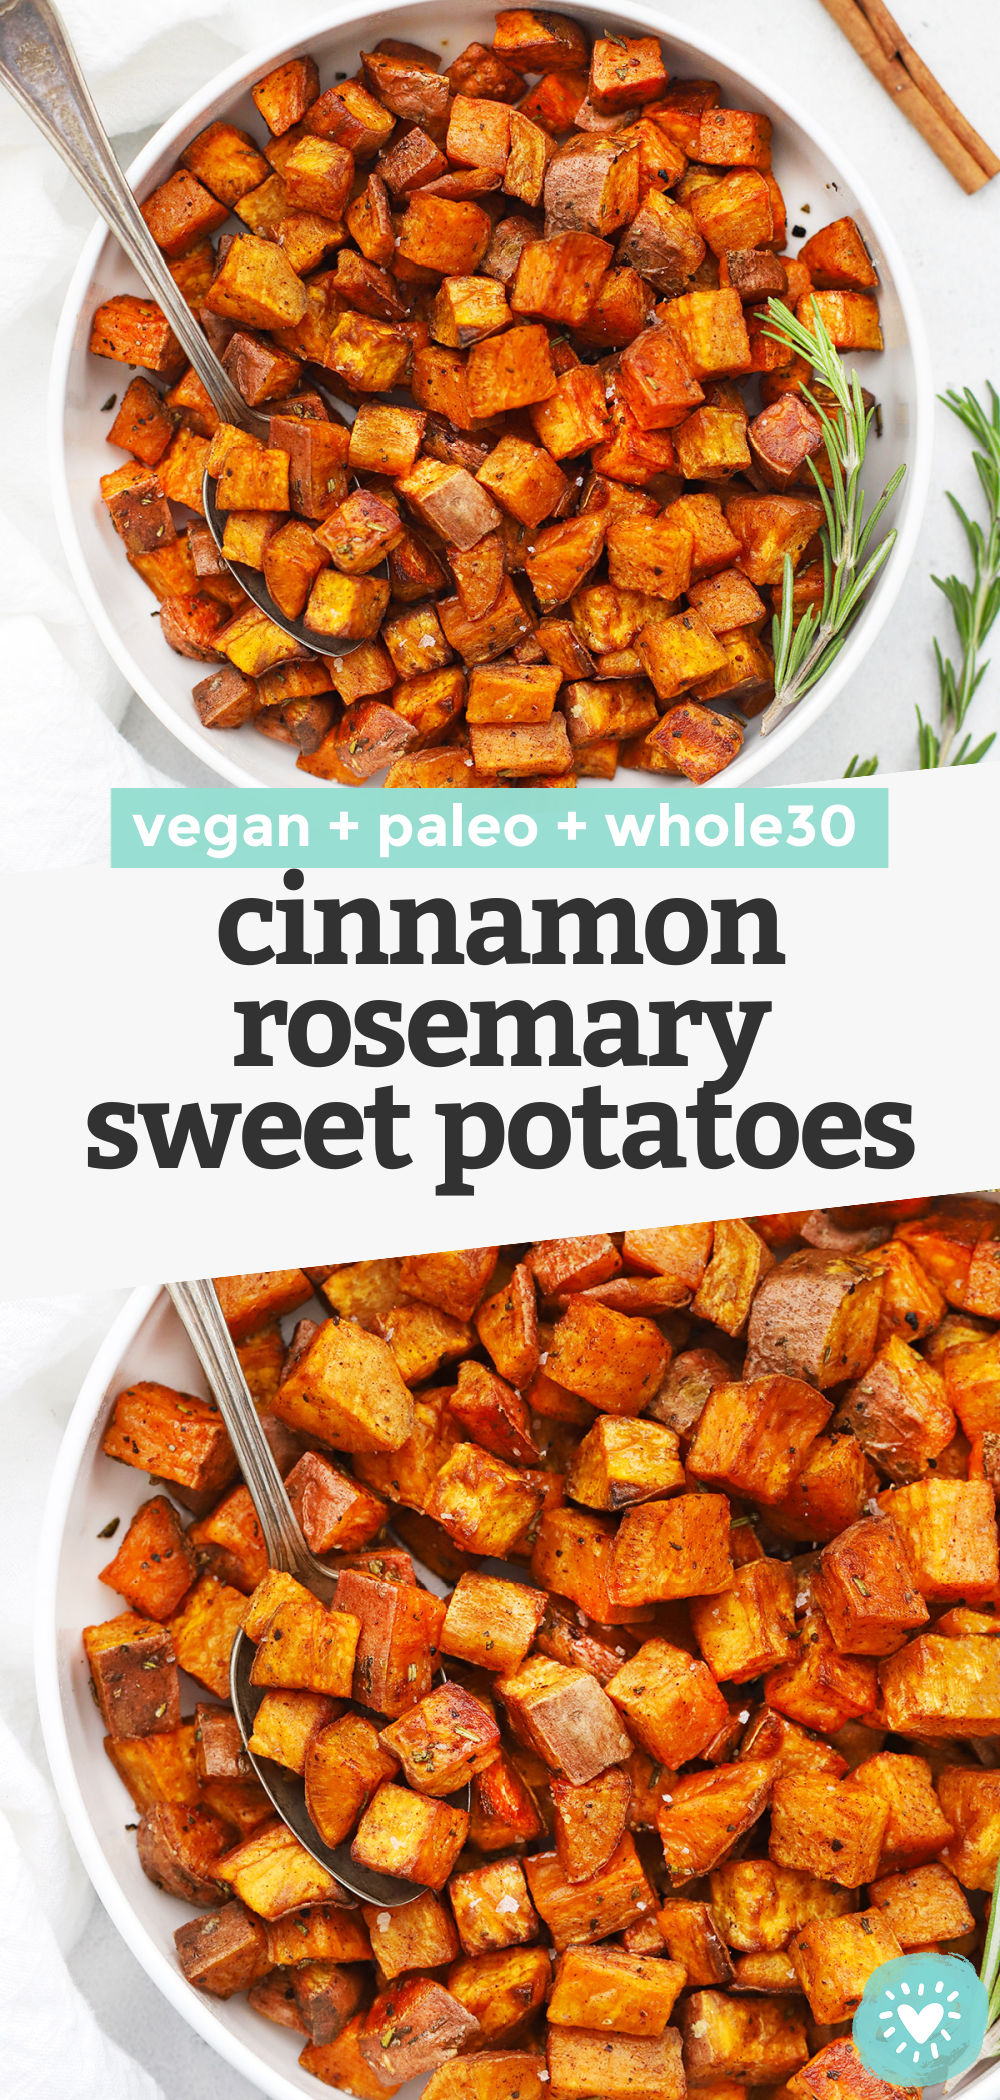 Cinnamon Rosemary Sweet Potatoes - These roasted rosemary sweet potatoes have a gorgeous caramelized texture and a delicious blend of flavors you'll crave over and over again. (Paleo, Vegan, Whole30) // Roasted Sweet Potatoes Recipe // Side Dish // Healthy Recipe #sweetpotatoes #sidedish #whole30 #vegan #paleo